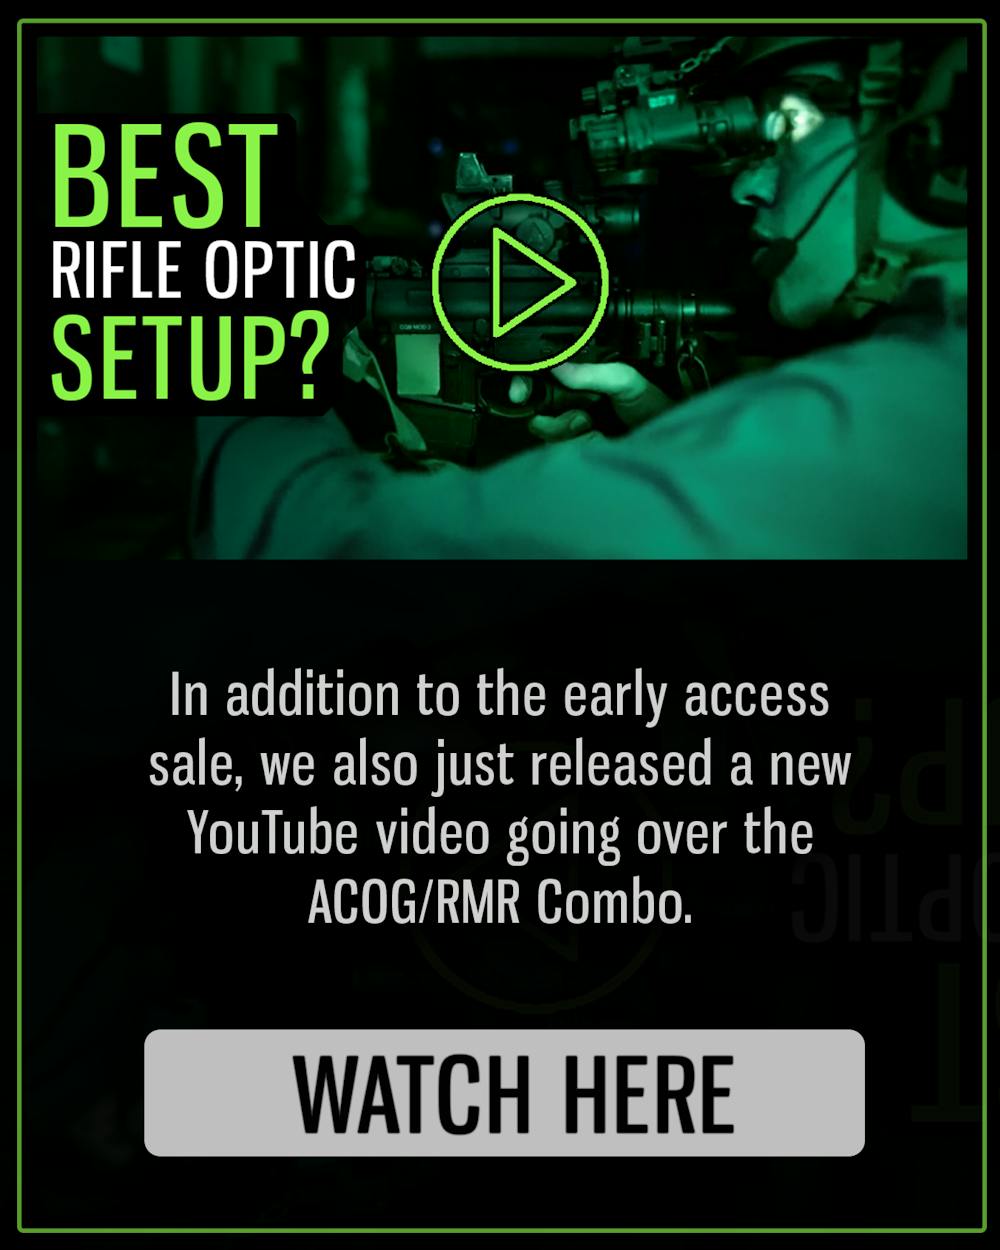 BEST RIFLE OPTIC SETUP?

In addition to the early access sale, we also just released a new YouTube video going over the ACOG/RMR Combo.

WATCH HERE